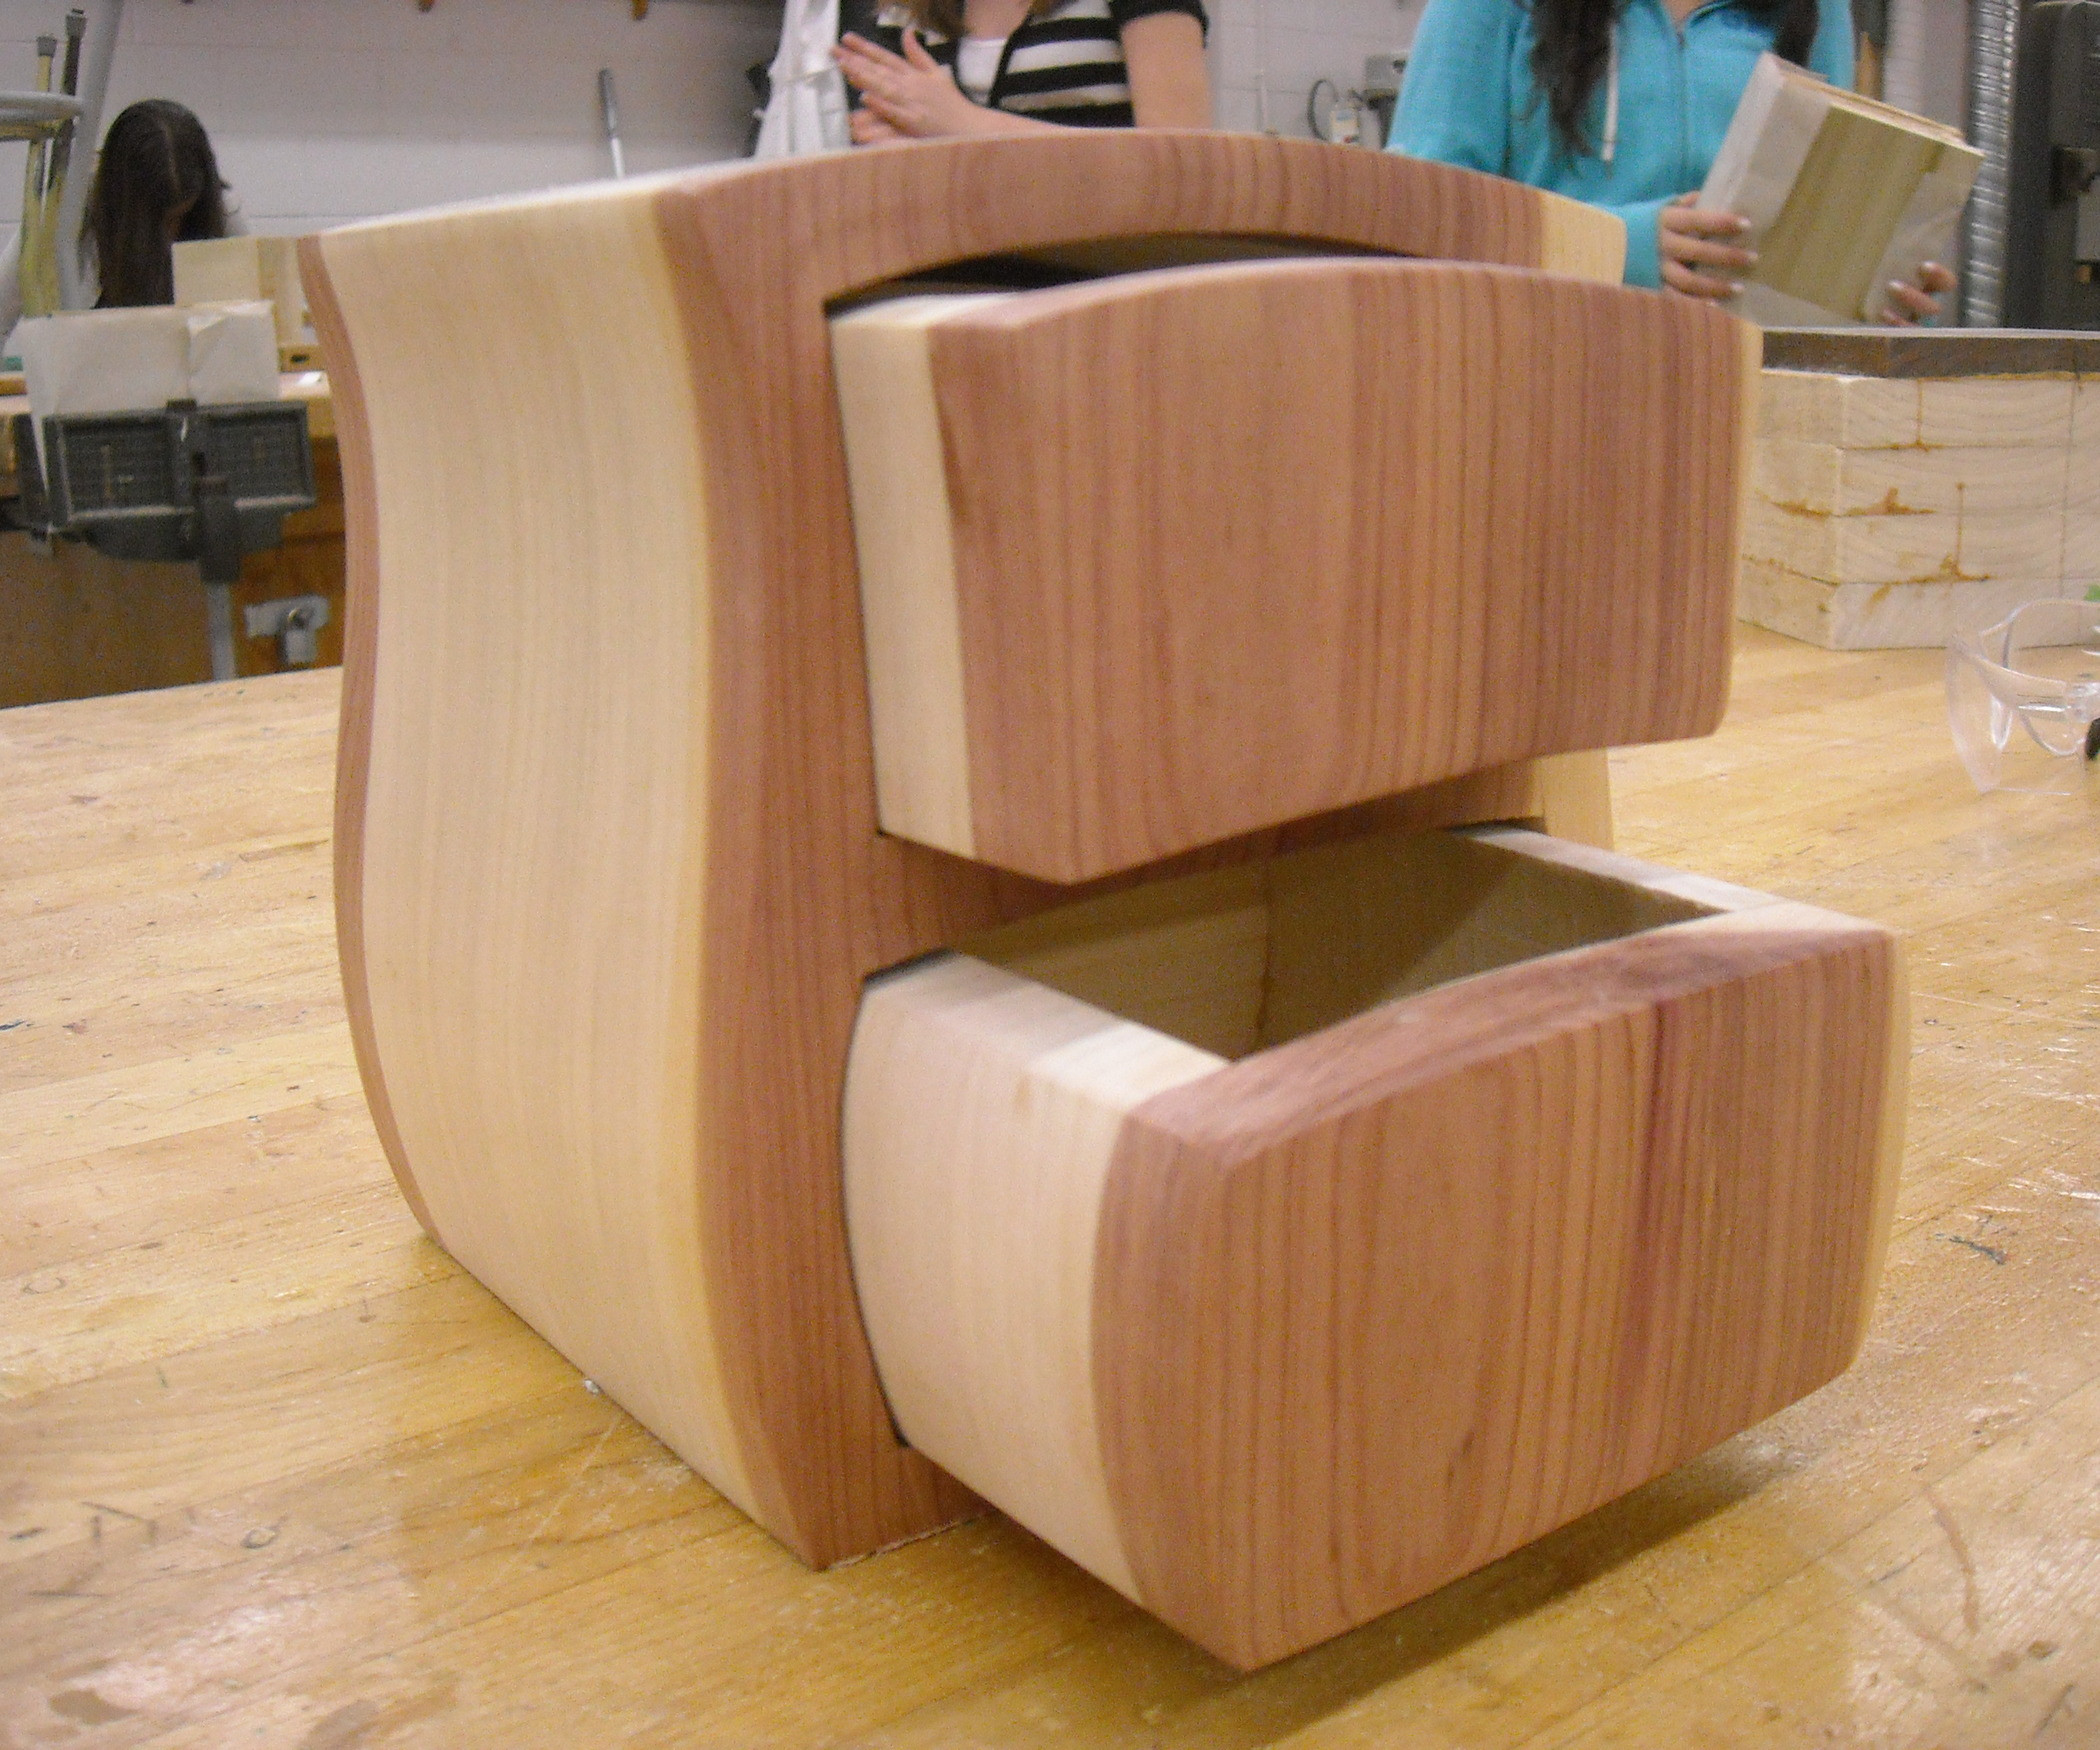 Best ideas about DIY Wood Working
. Save or Pin A Bandsaw Box KIDS Can Make 9 Steps with Now.